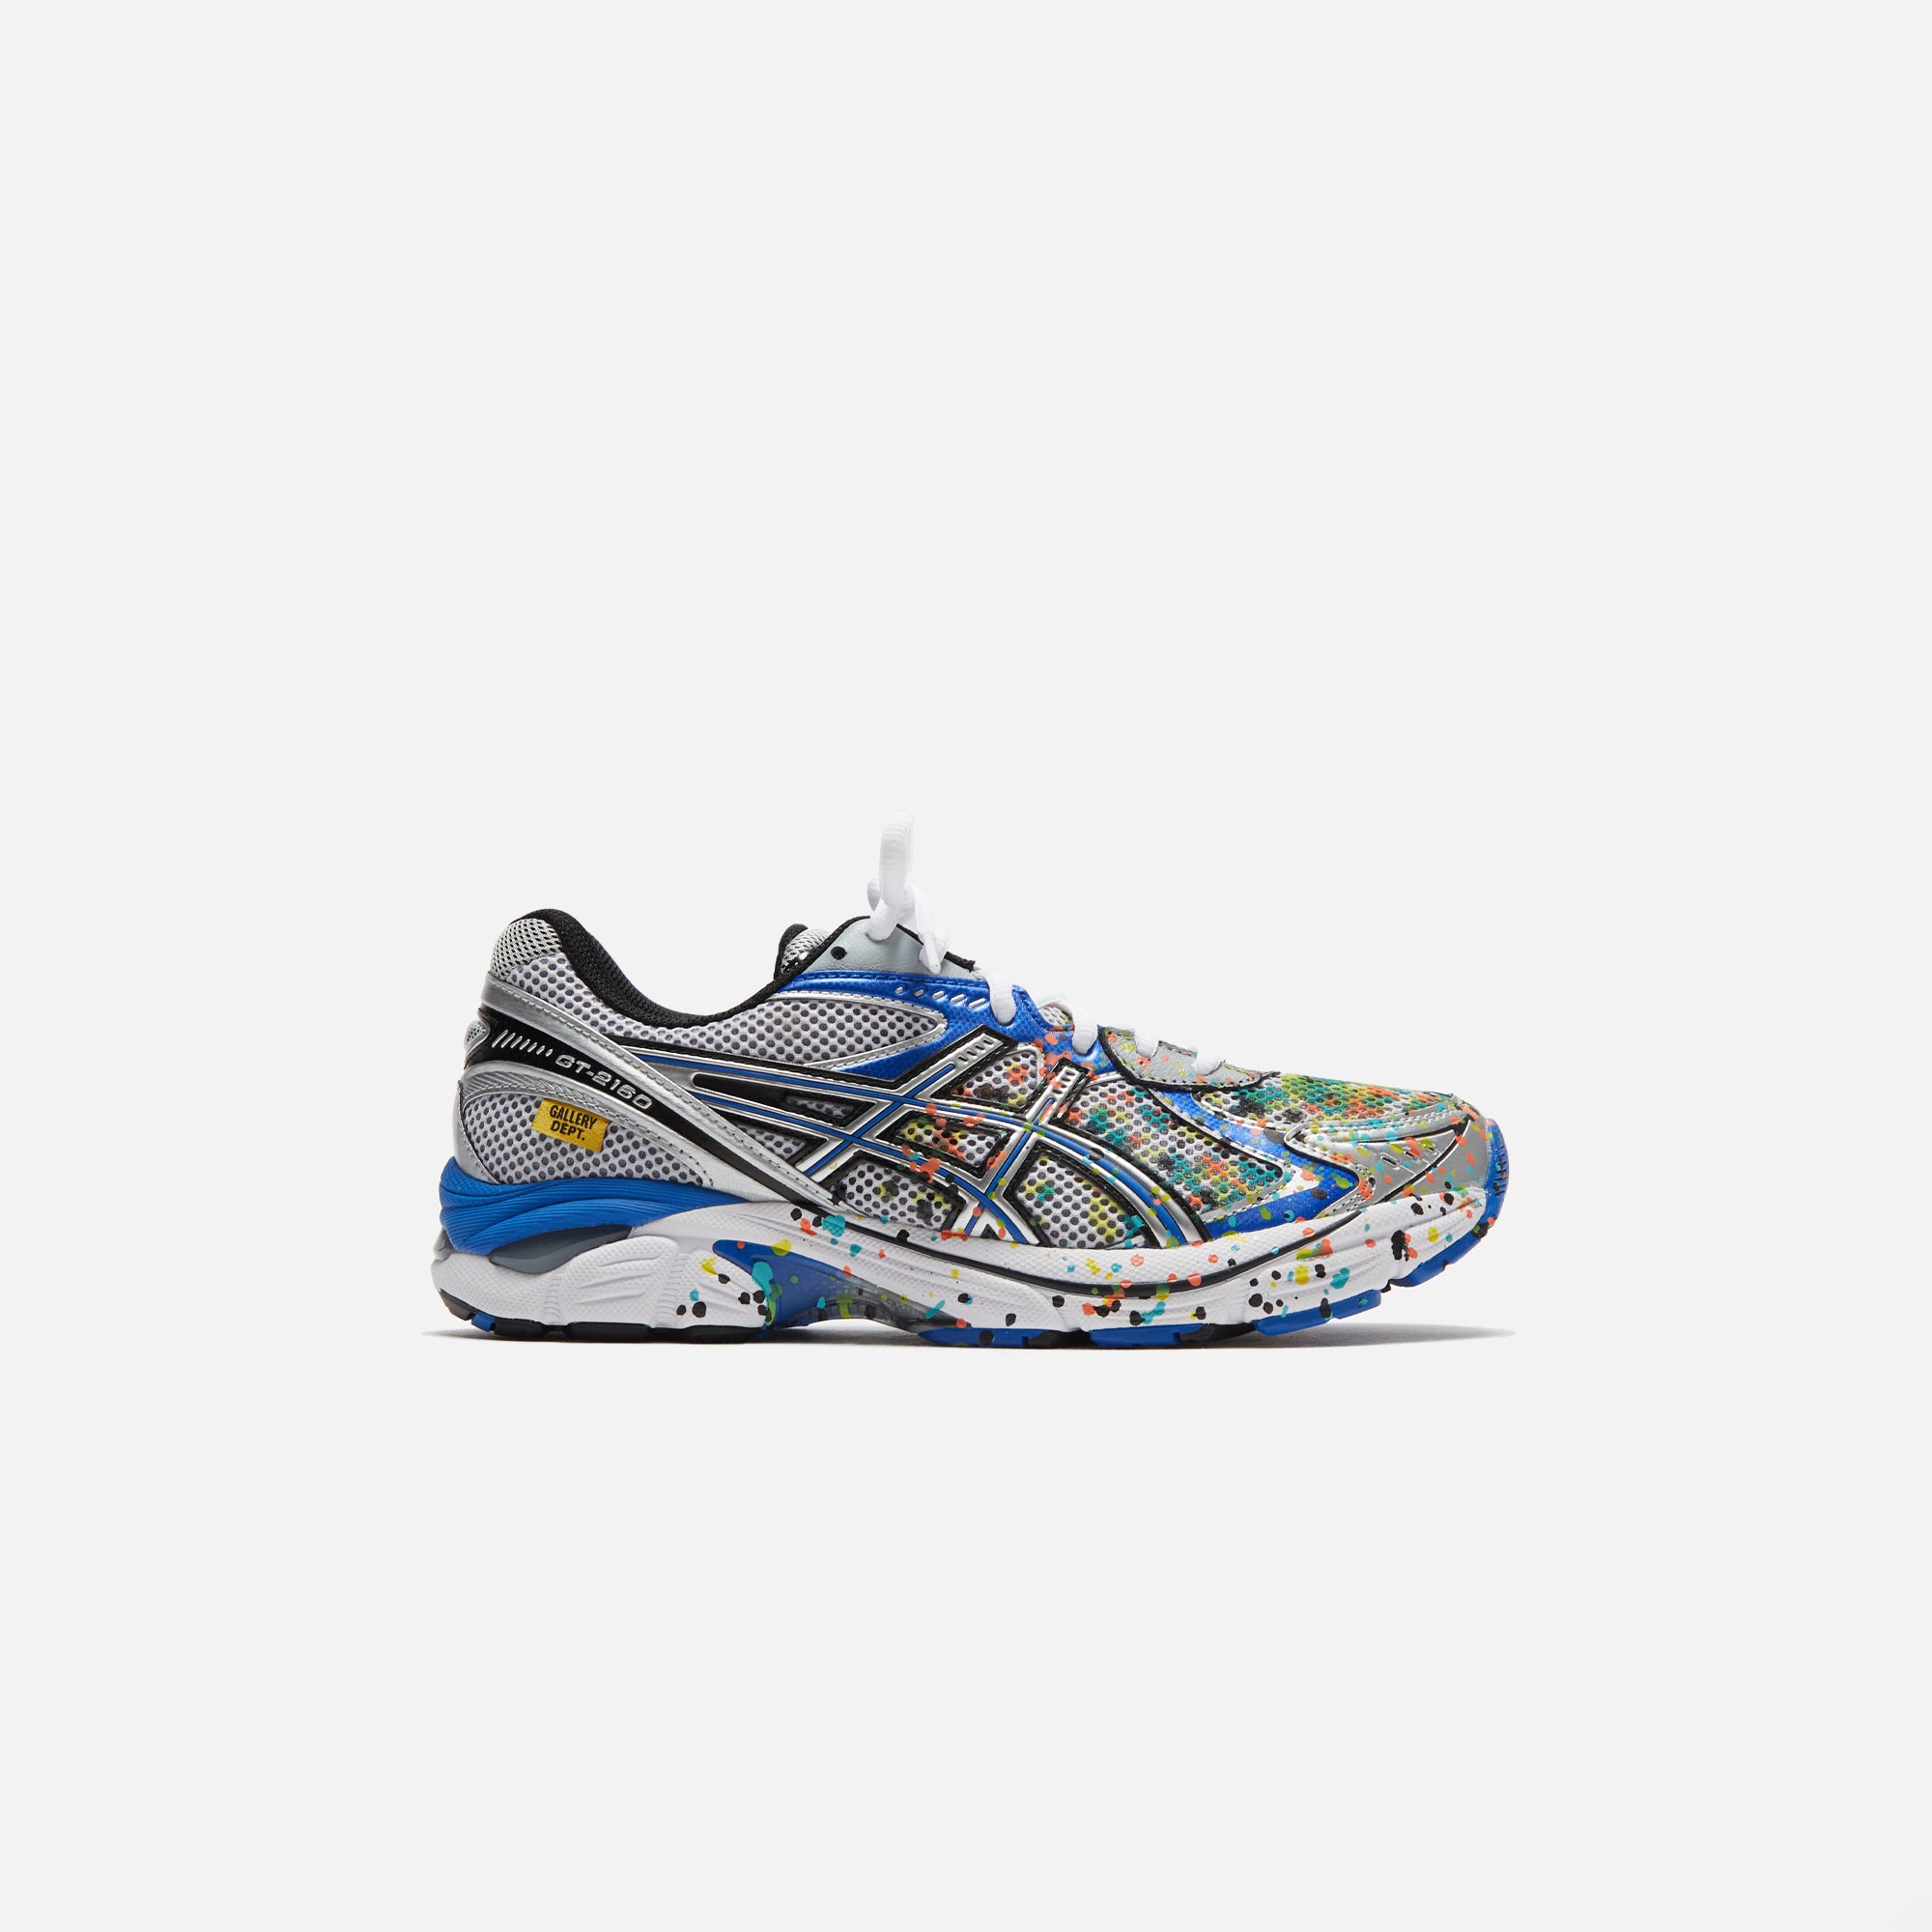 ASICS x Gallery Dept GT-2160 - White / Pure Silver – Kith